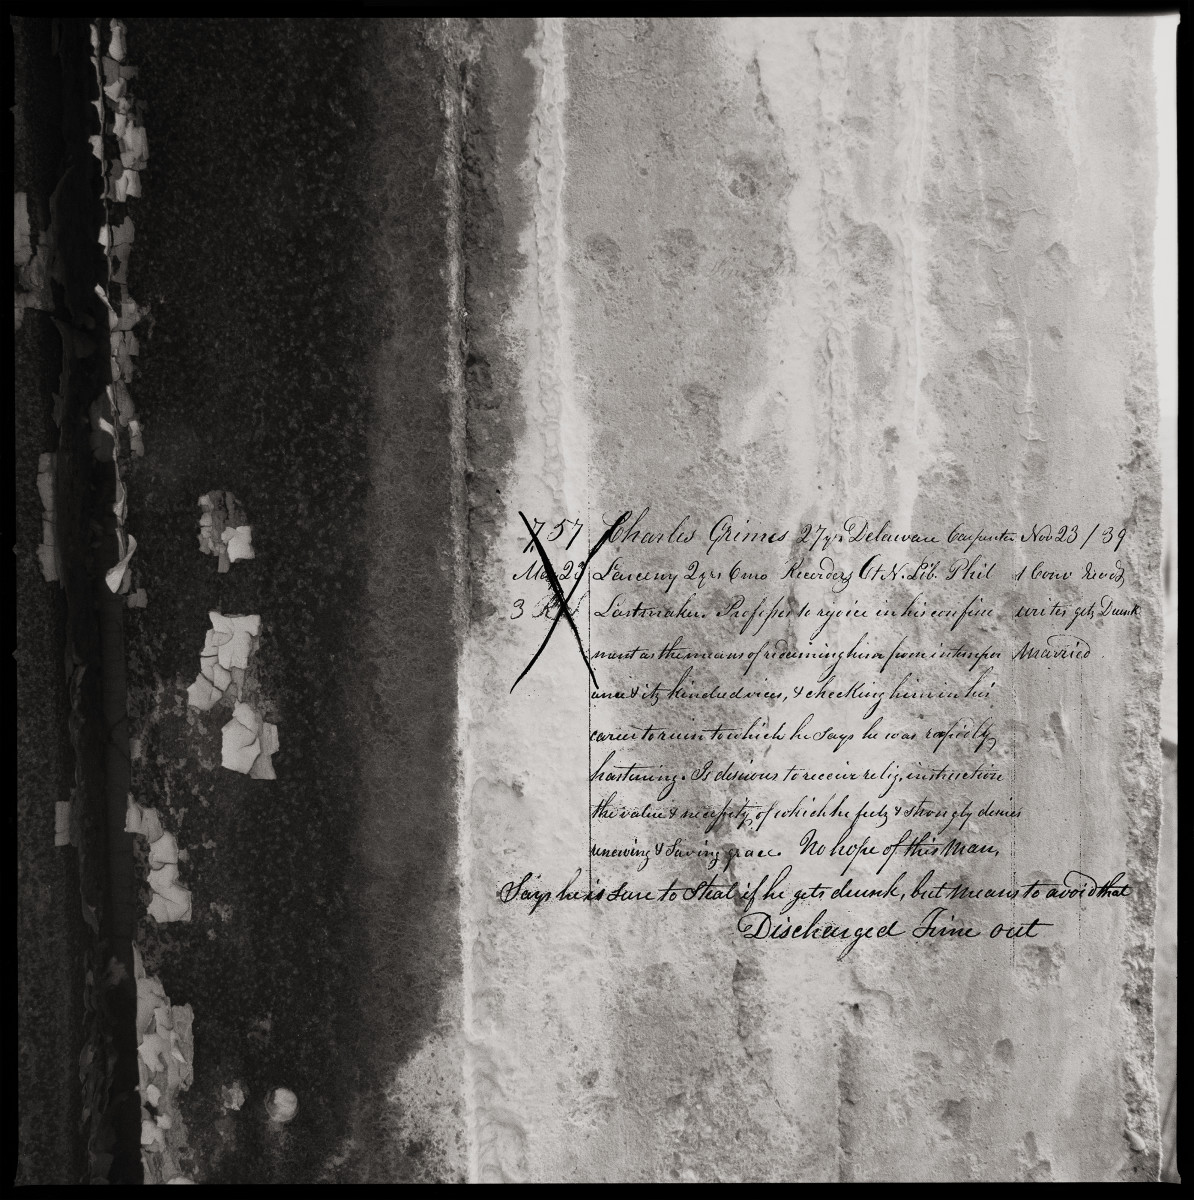 Charles Grimes by Eric T. Kunsman  Image: ID: A black and white image shows a wall with peeling paint.  In an overlay there is cursive writing detailing prisoner Charles Grimes.